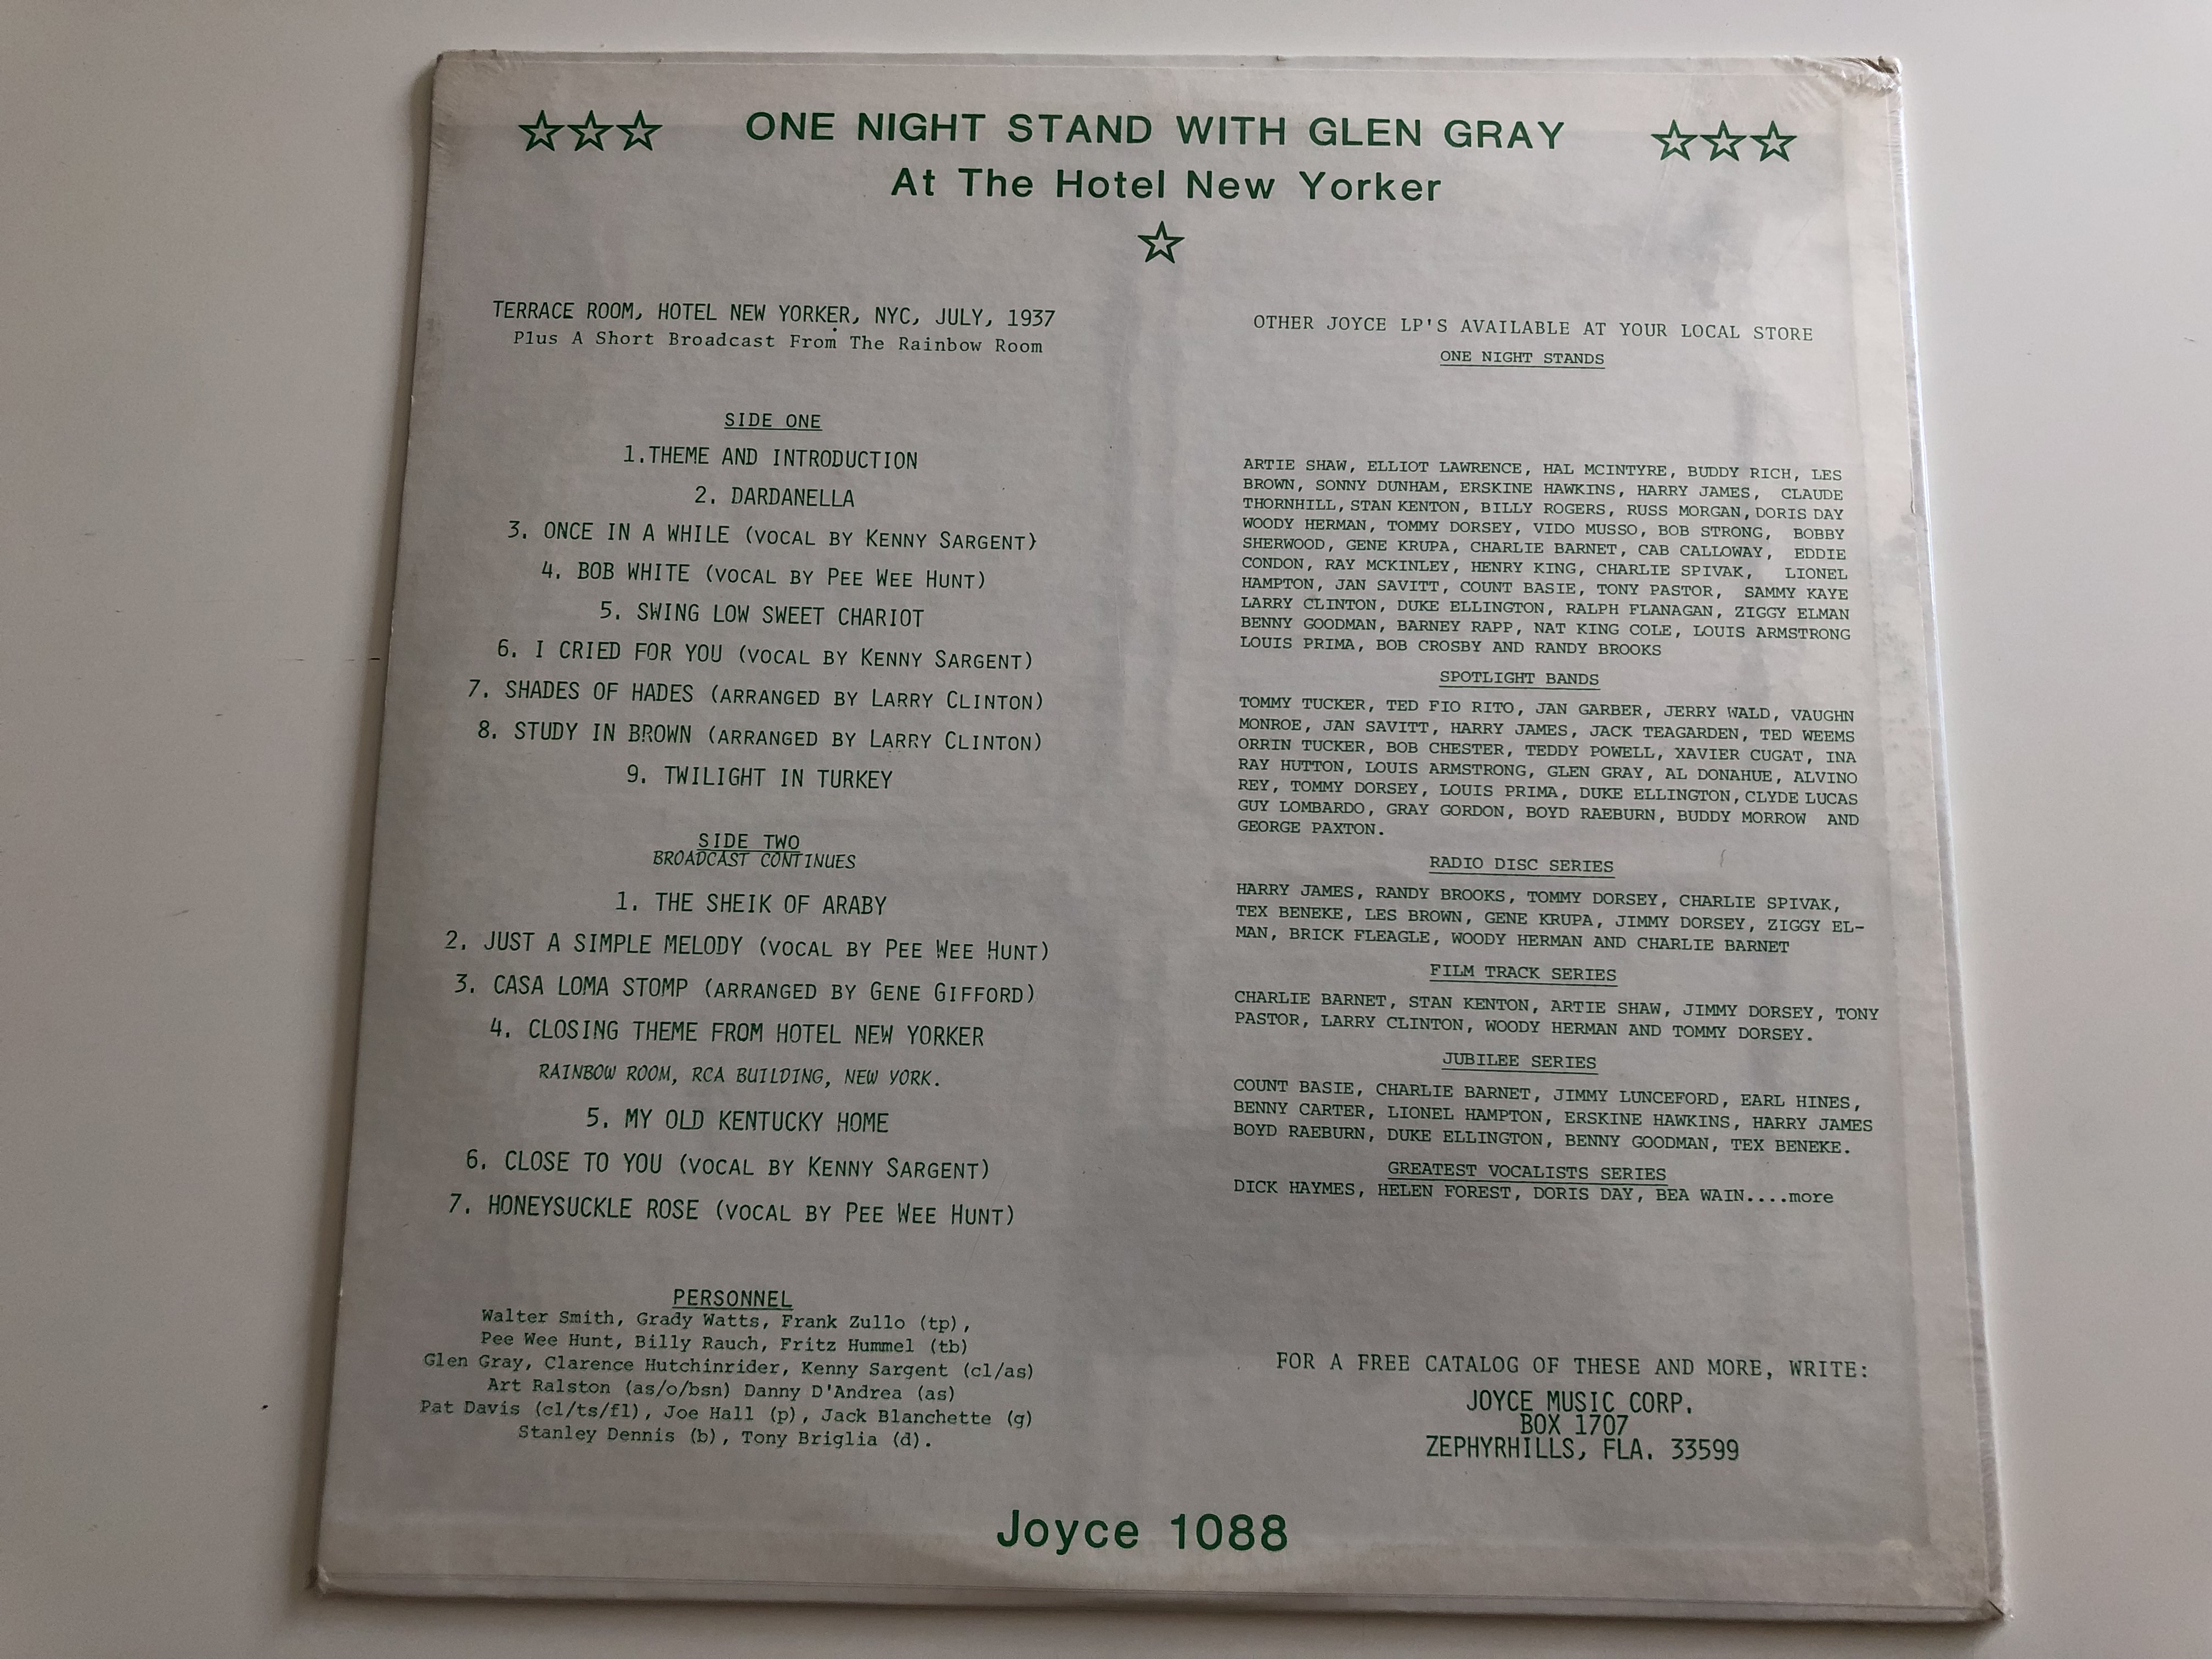 one-night-stand-with-glen-gray-at-the-hotel-new-yorker-july-1937-joyce-lp-1088-2-.jpg